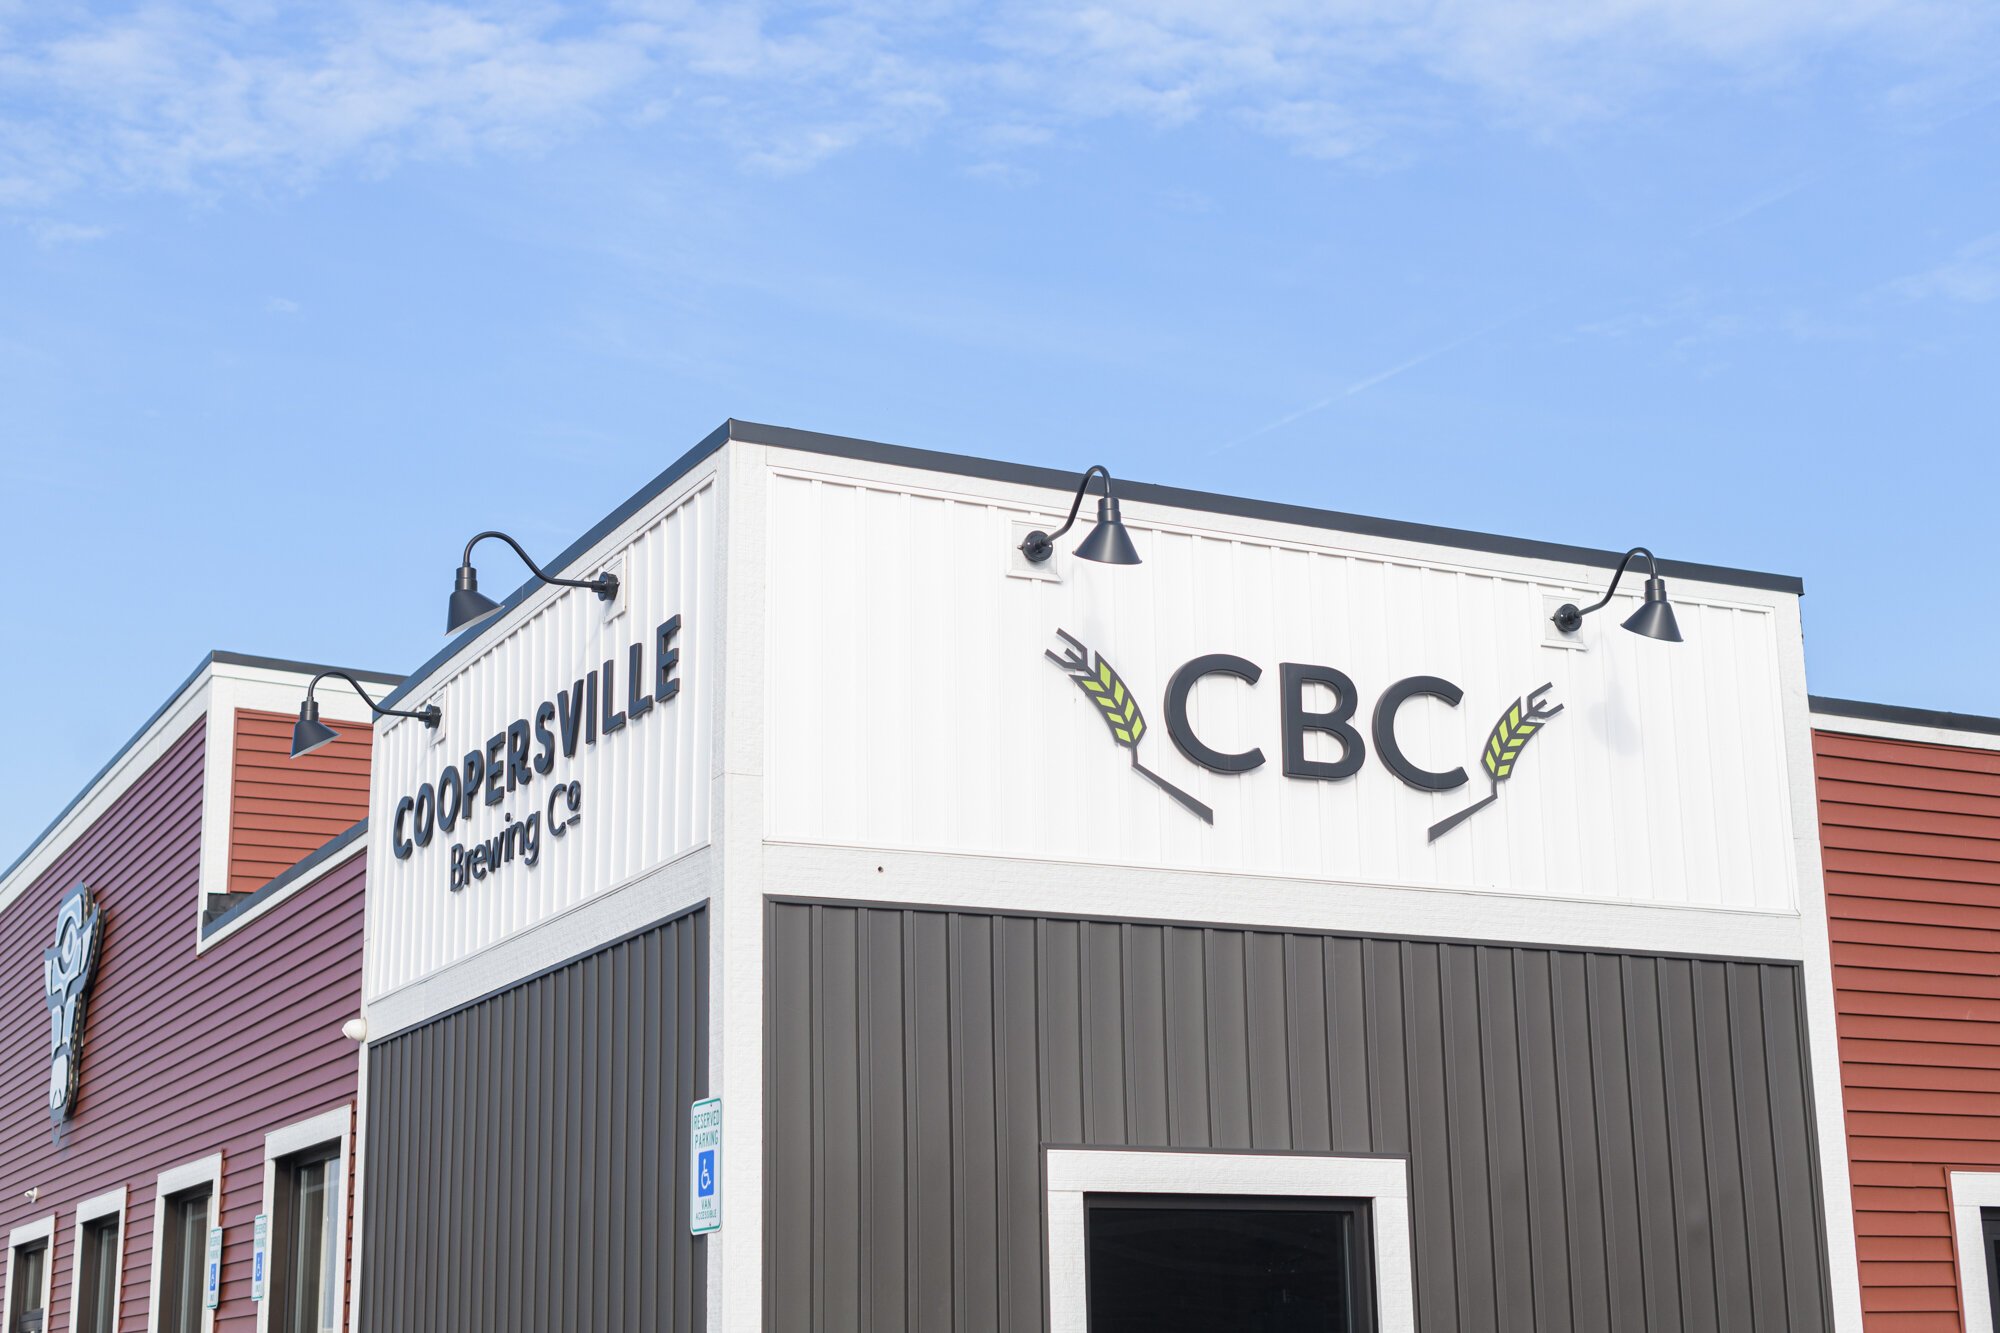 An exterior shot of Coopersville Brewing Co. The brewery is right off Interstate 96.